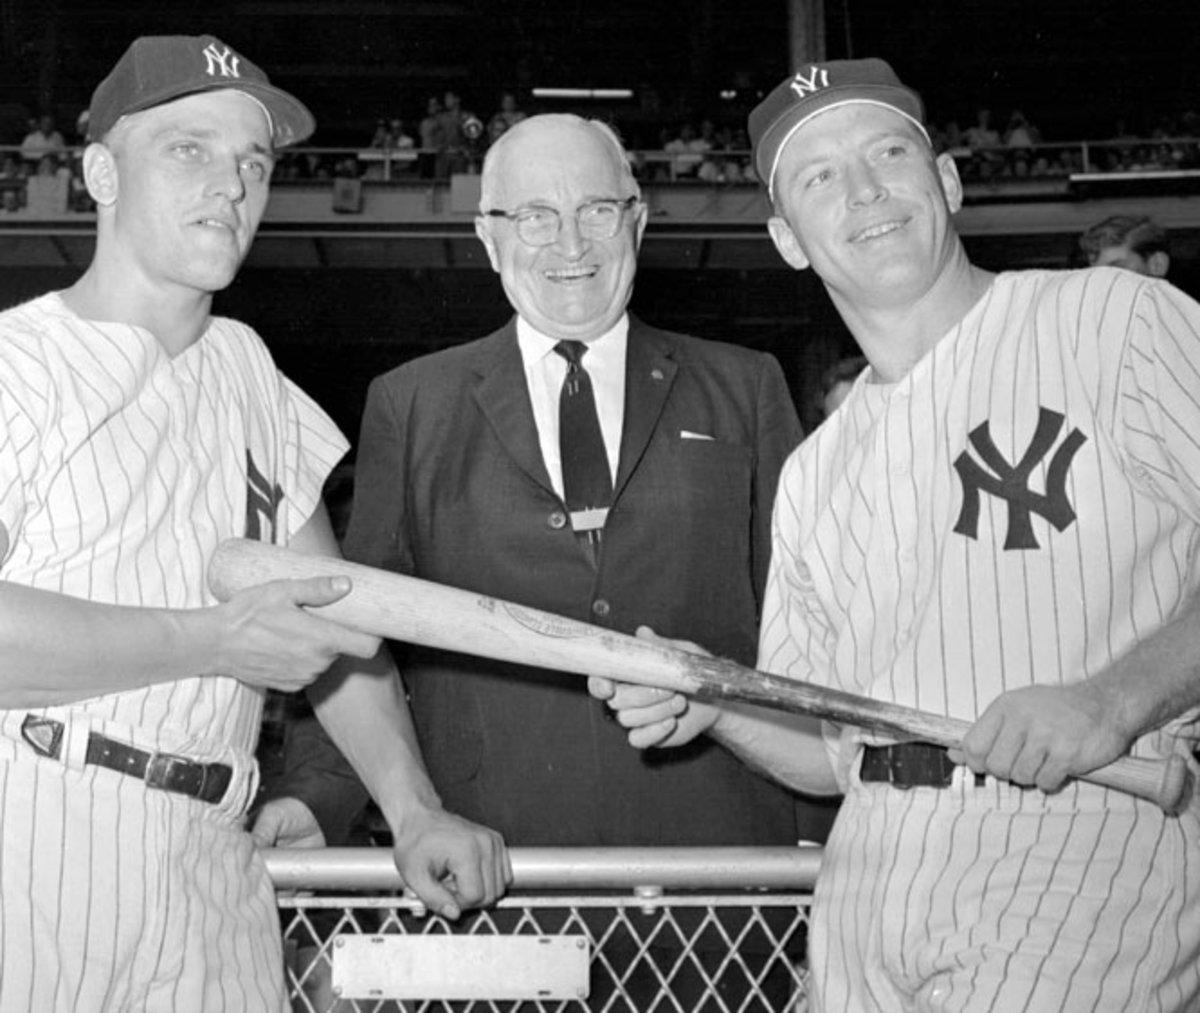 Harry S. Truman, Roger Maris and Mickey Mantle